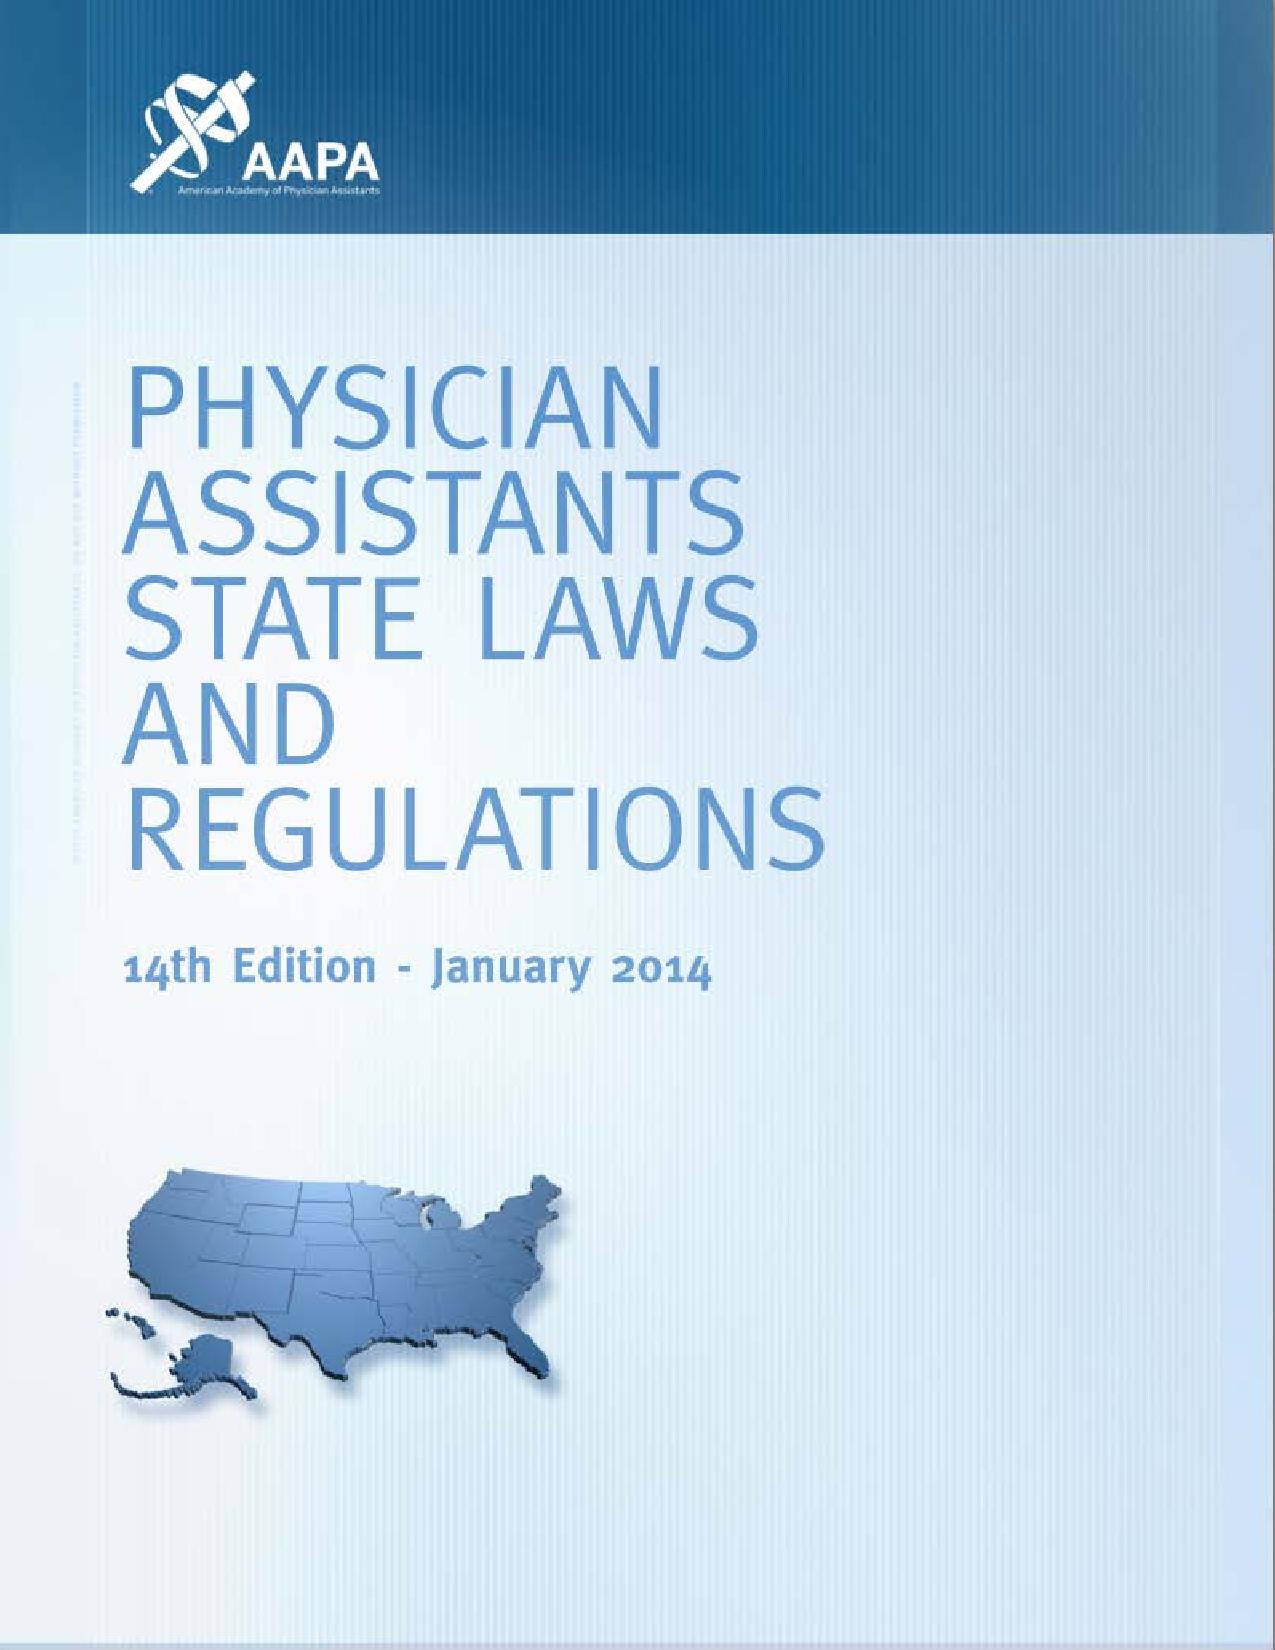 Physician Assistant State Laws and Regulations